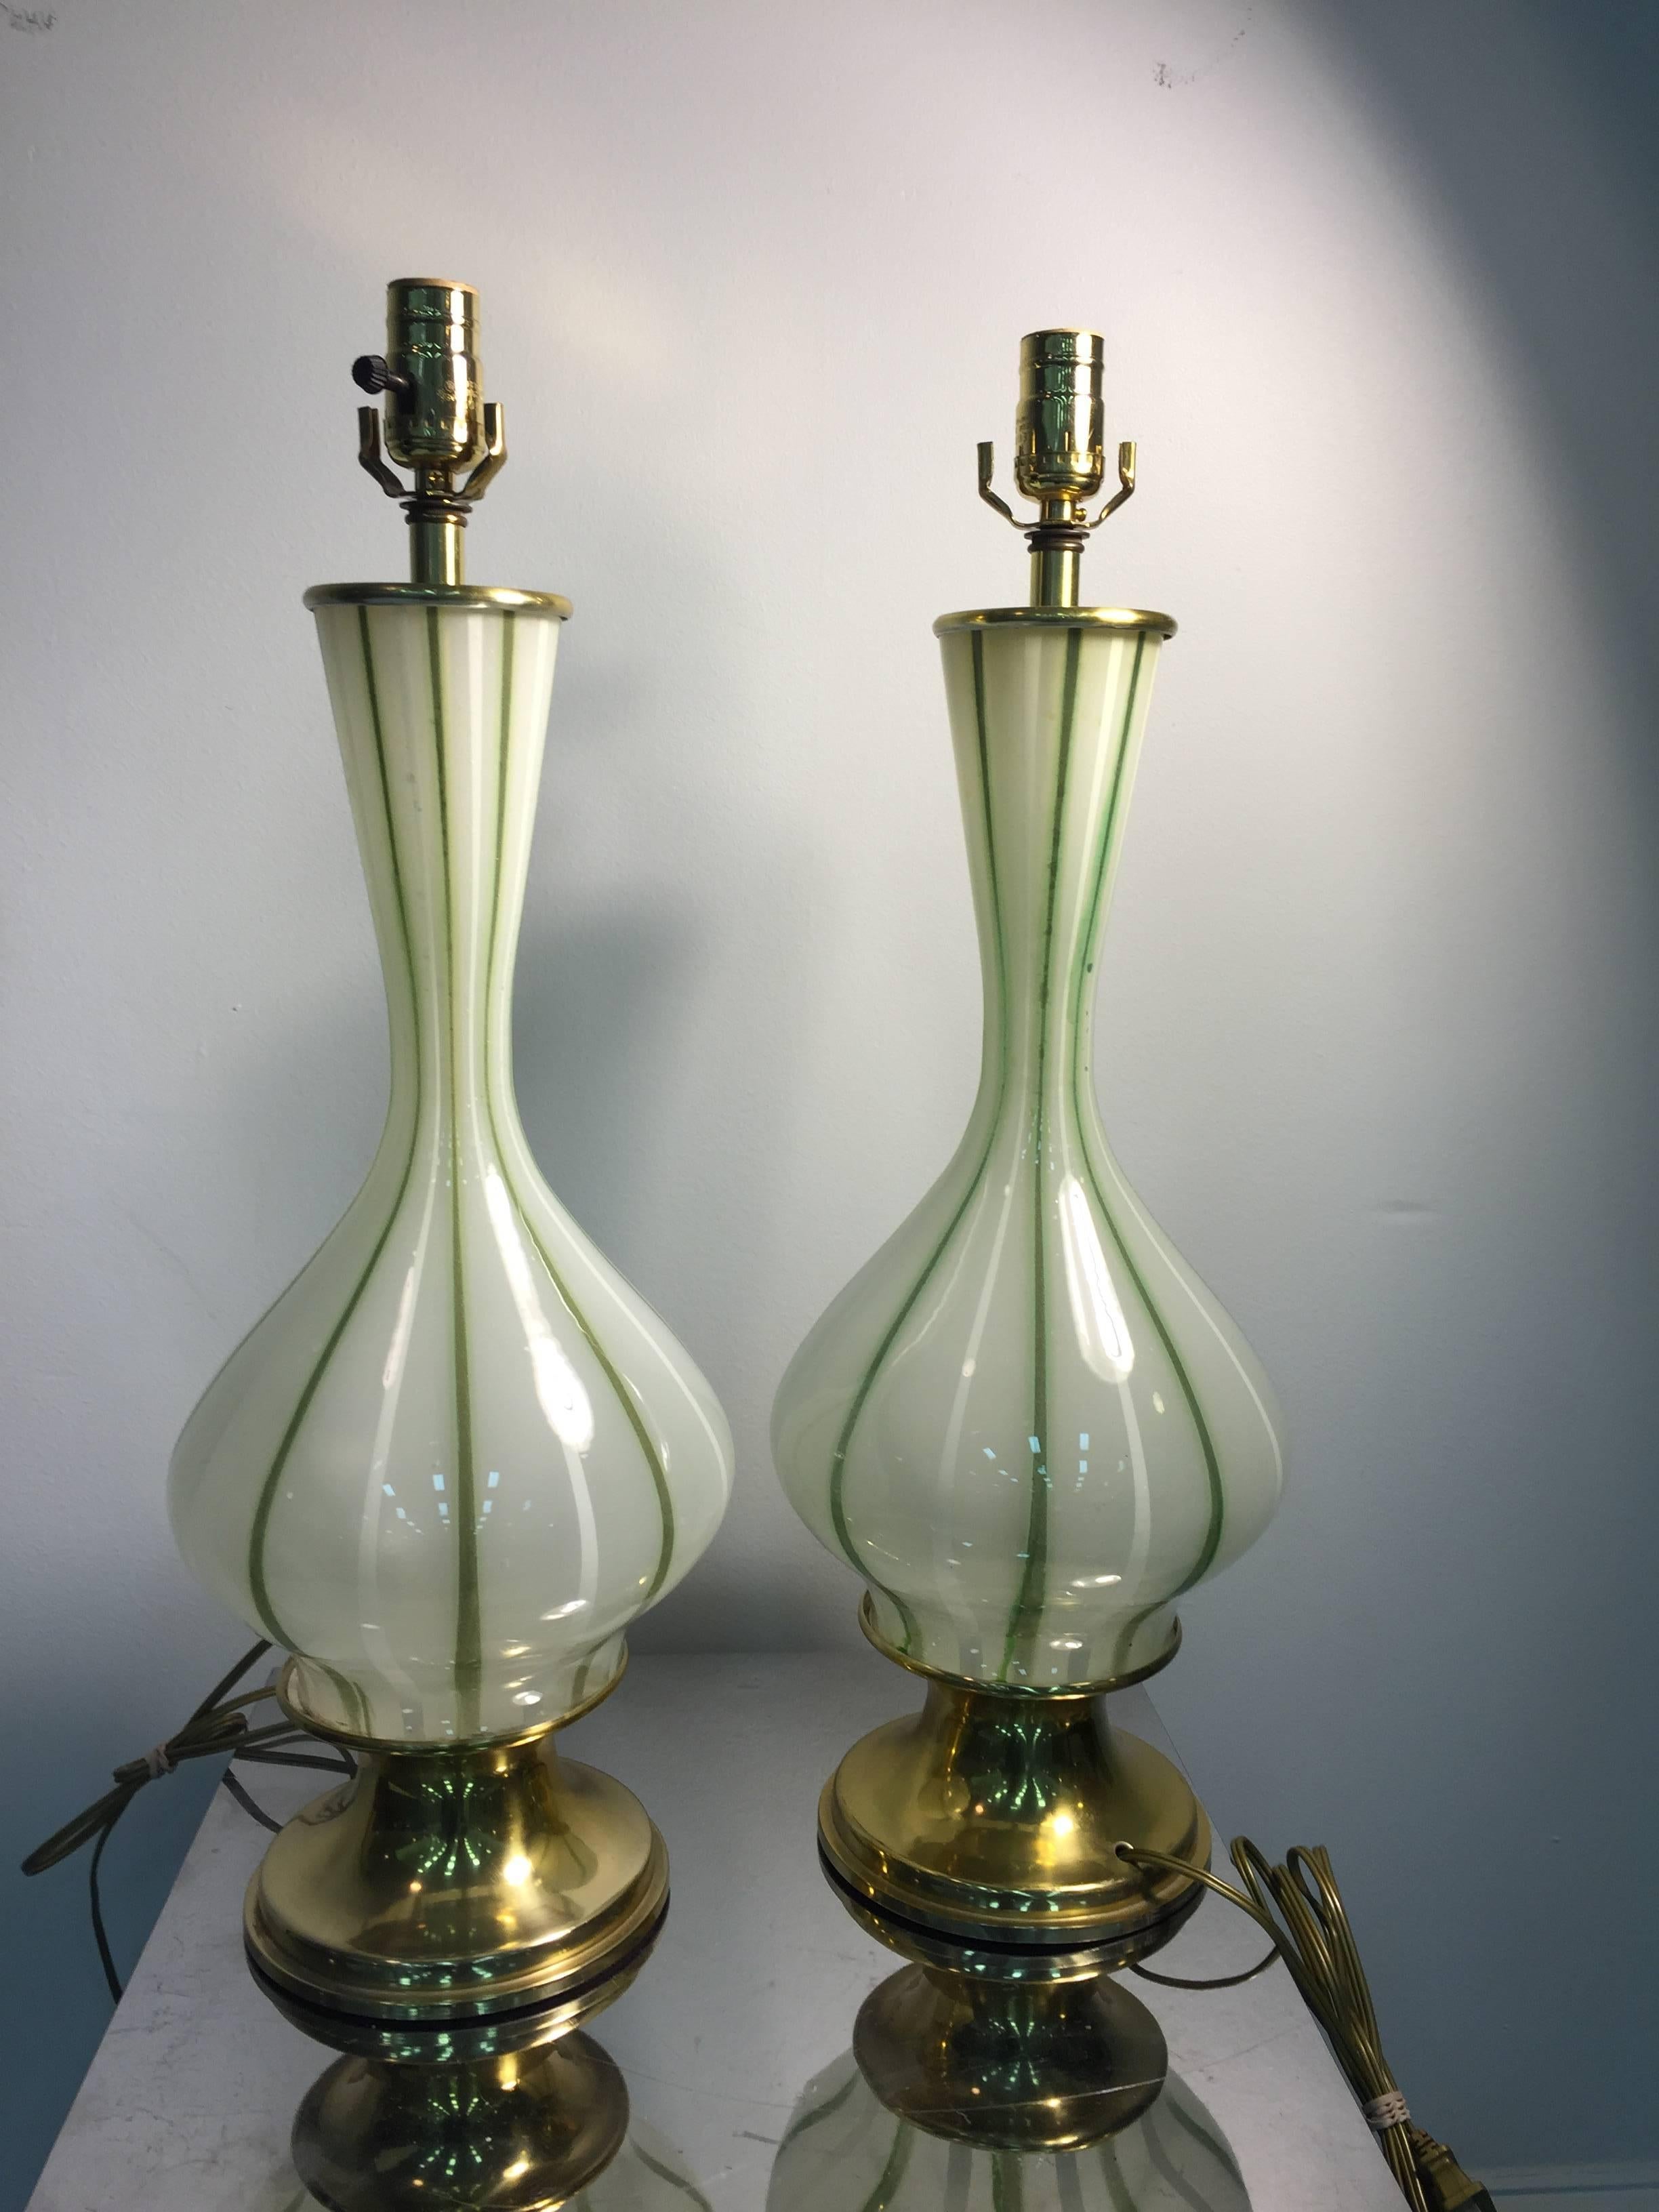 A lovely pair of 1970s Italian Murano glass table lamps in white with green stripes.